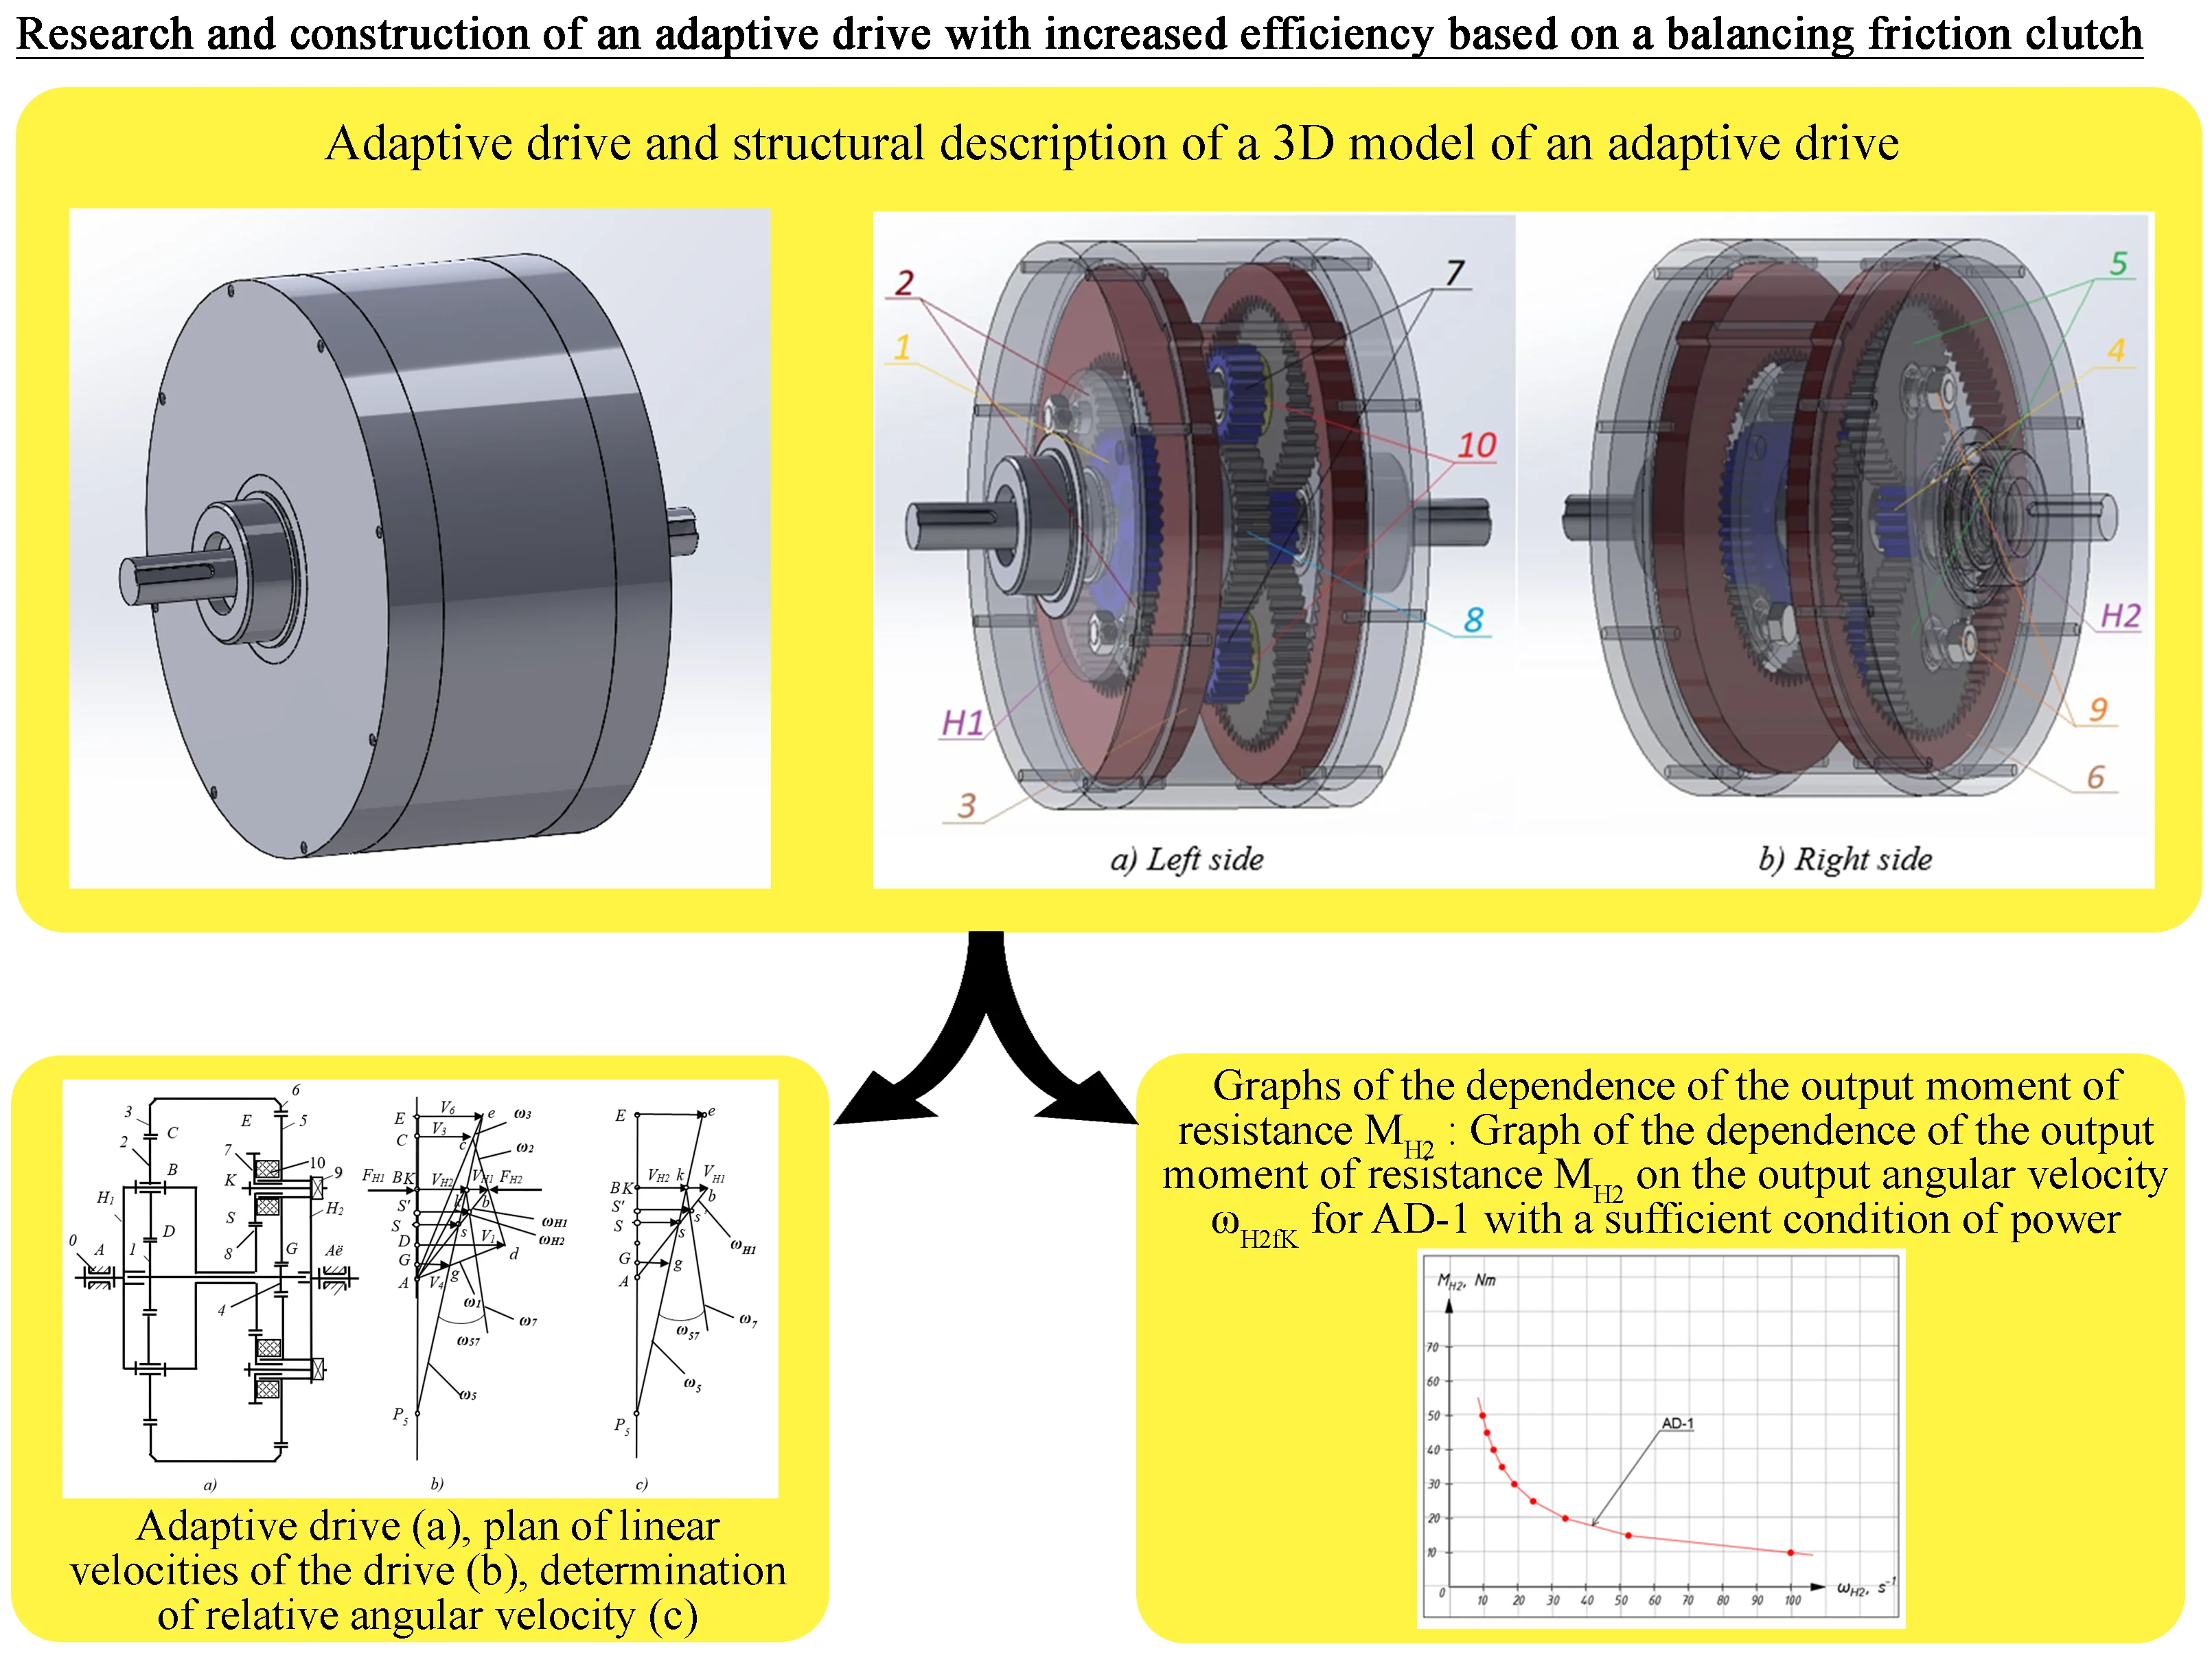 Research and construction of an adaptive drive with increased efficiency based on a balancing friction clutch